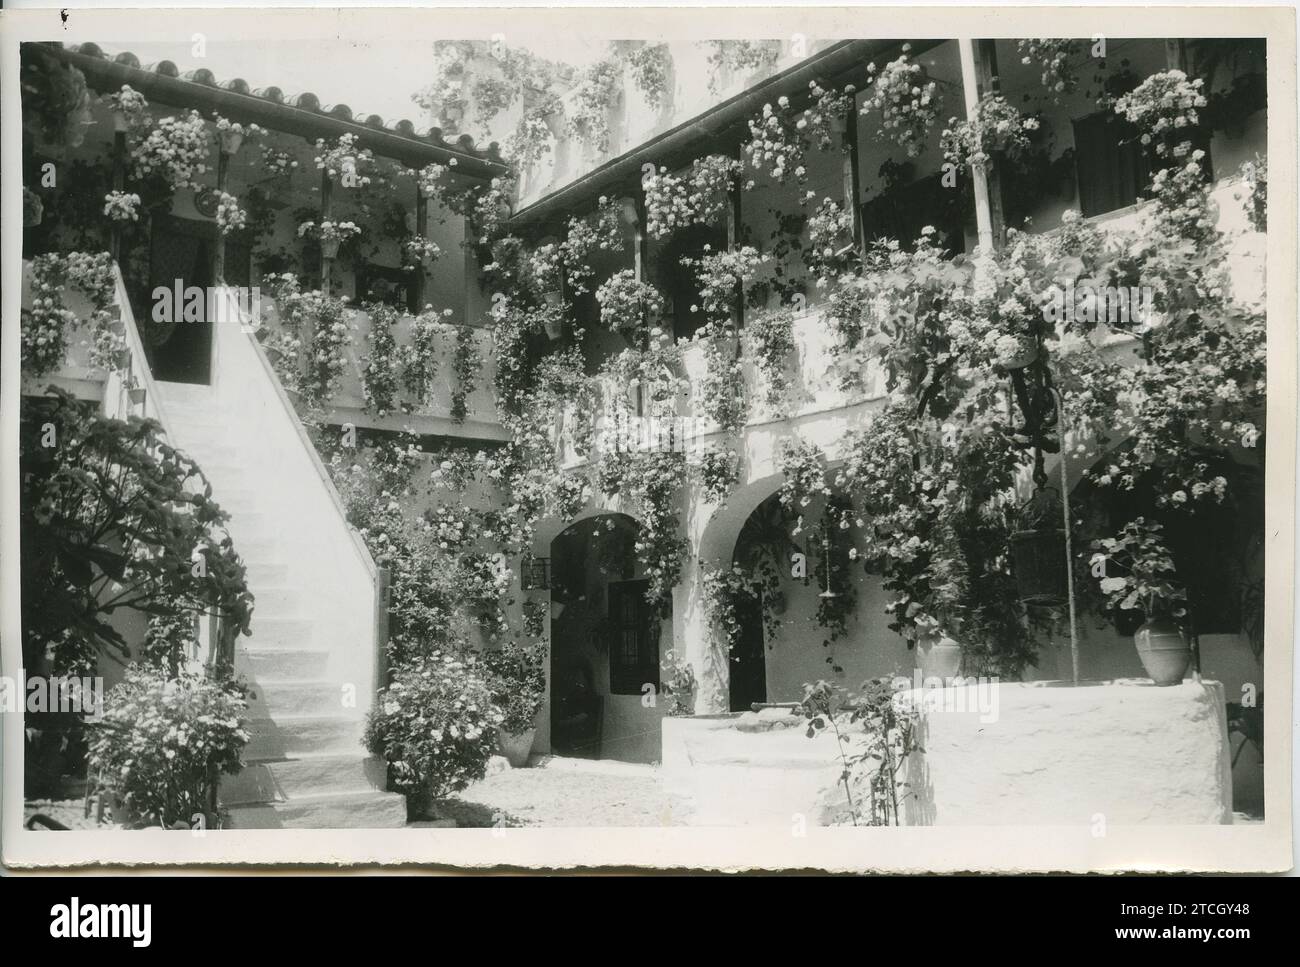 Córdoba, May 1960. The patio at 50 San Basilio Street, to which the competition jury awarded an honorary prize. Credit: Album / Archivo ABC / LADIS Ladislao Rodríguez Stock Photo